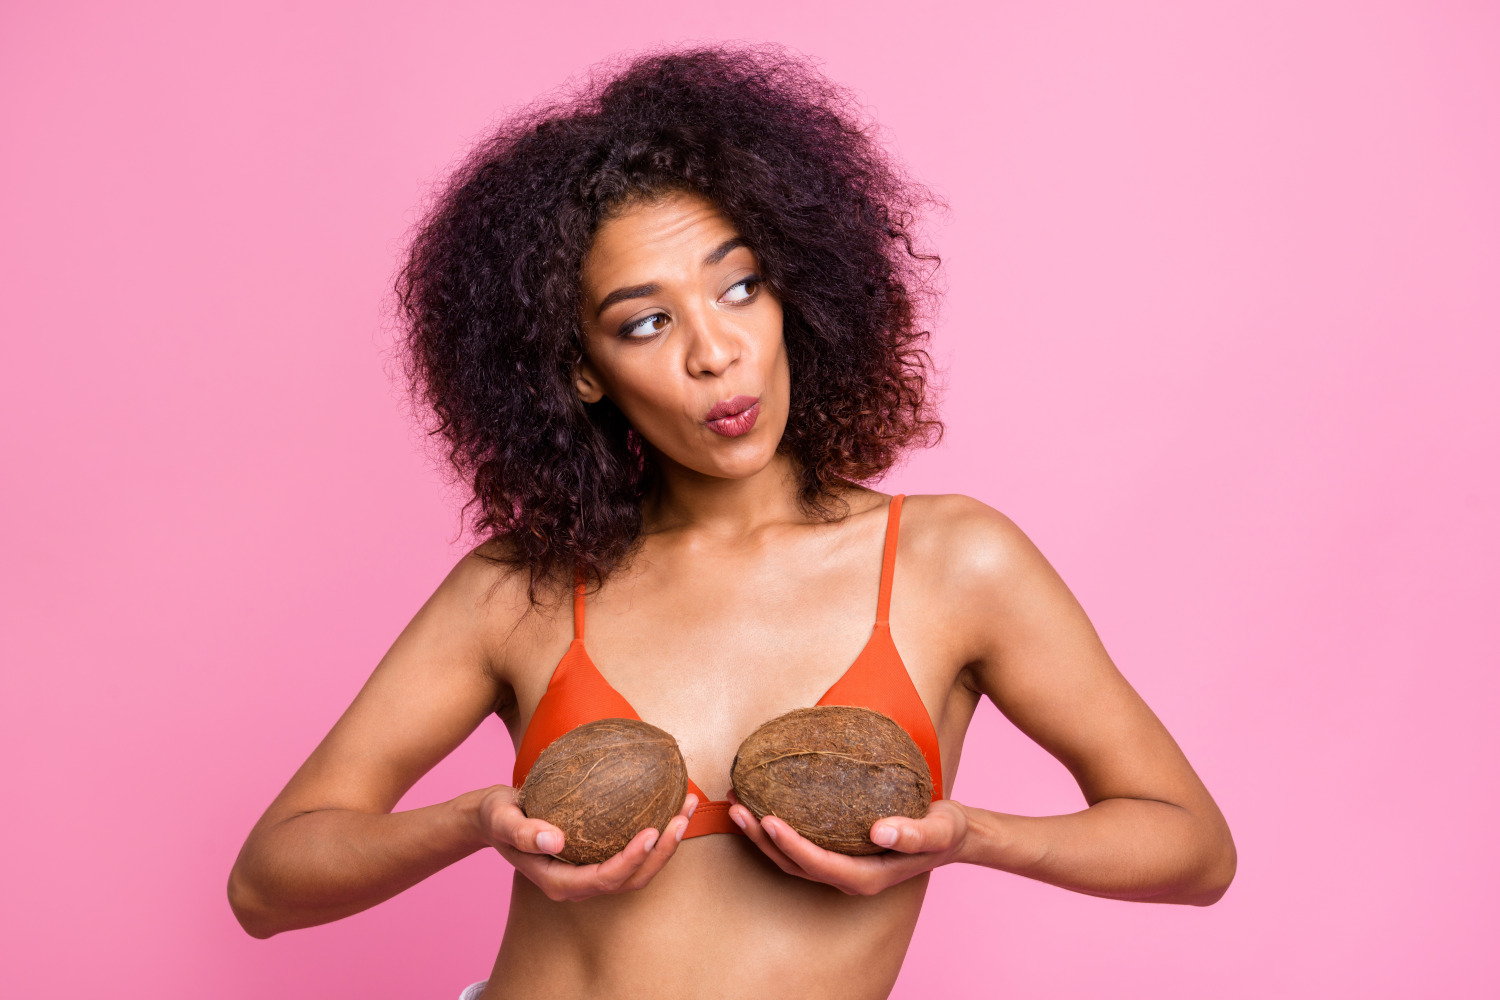 Trendy woman wearing orange bikini while holding coconuts up to try on new breast size in front of isolated pink background.